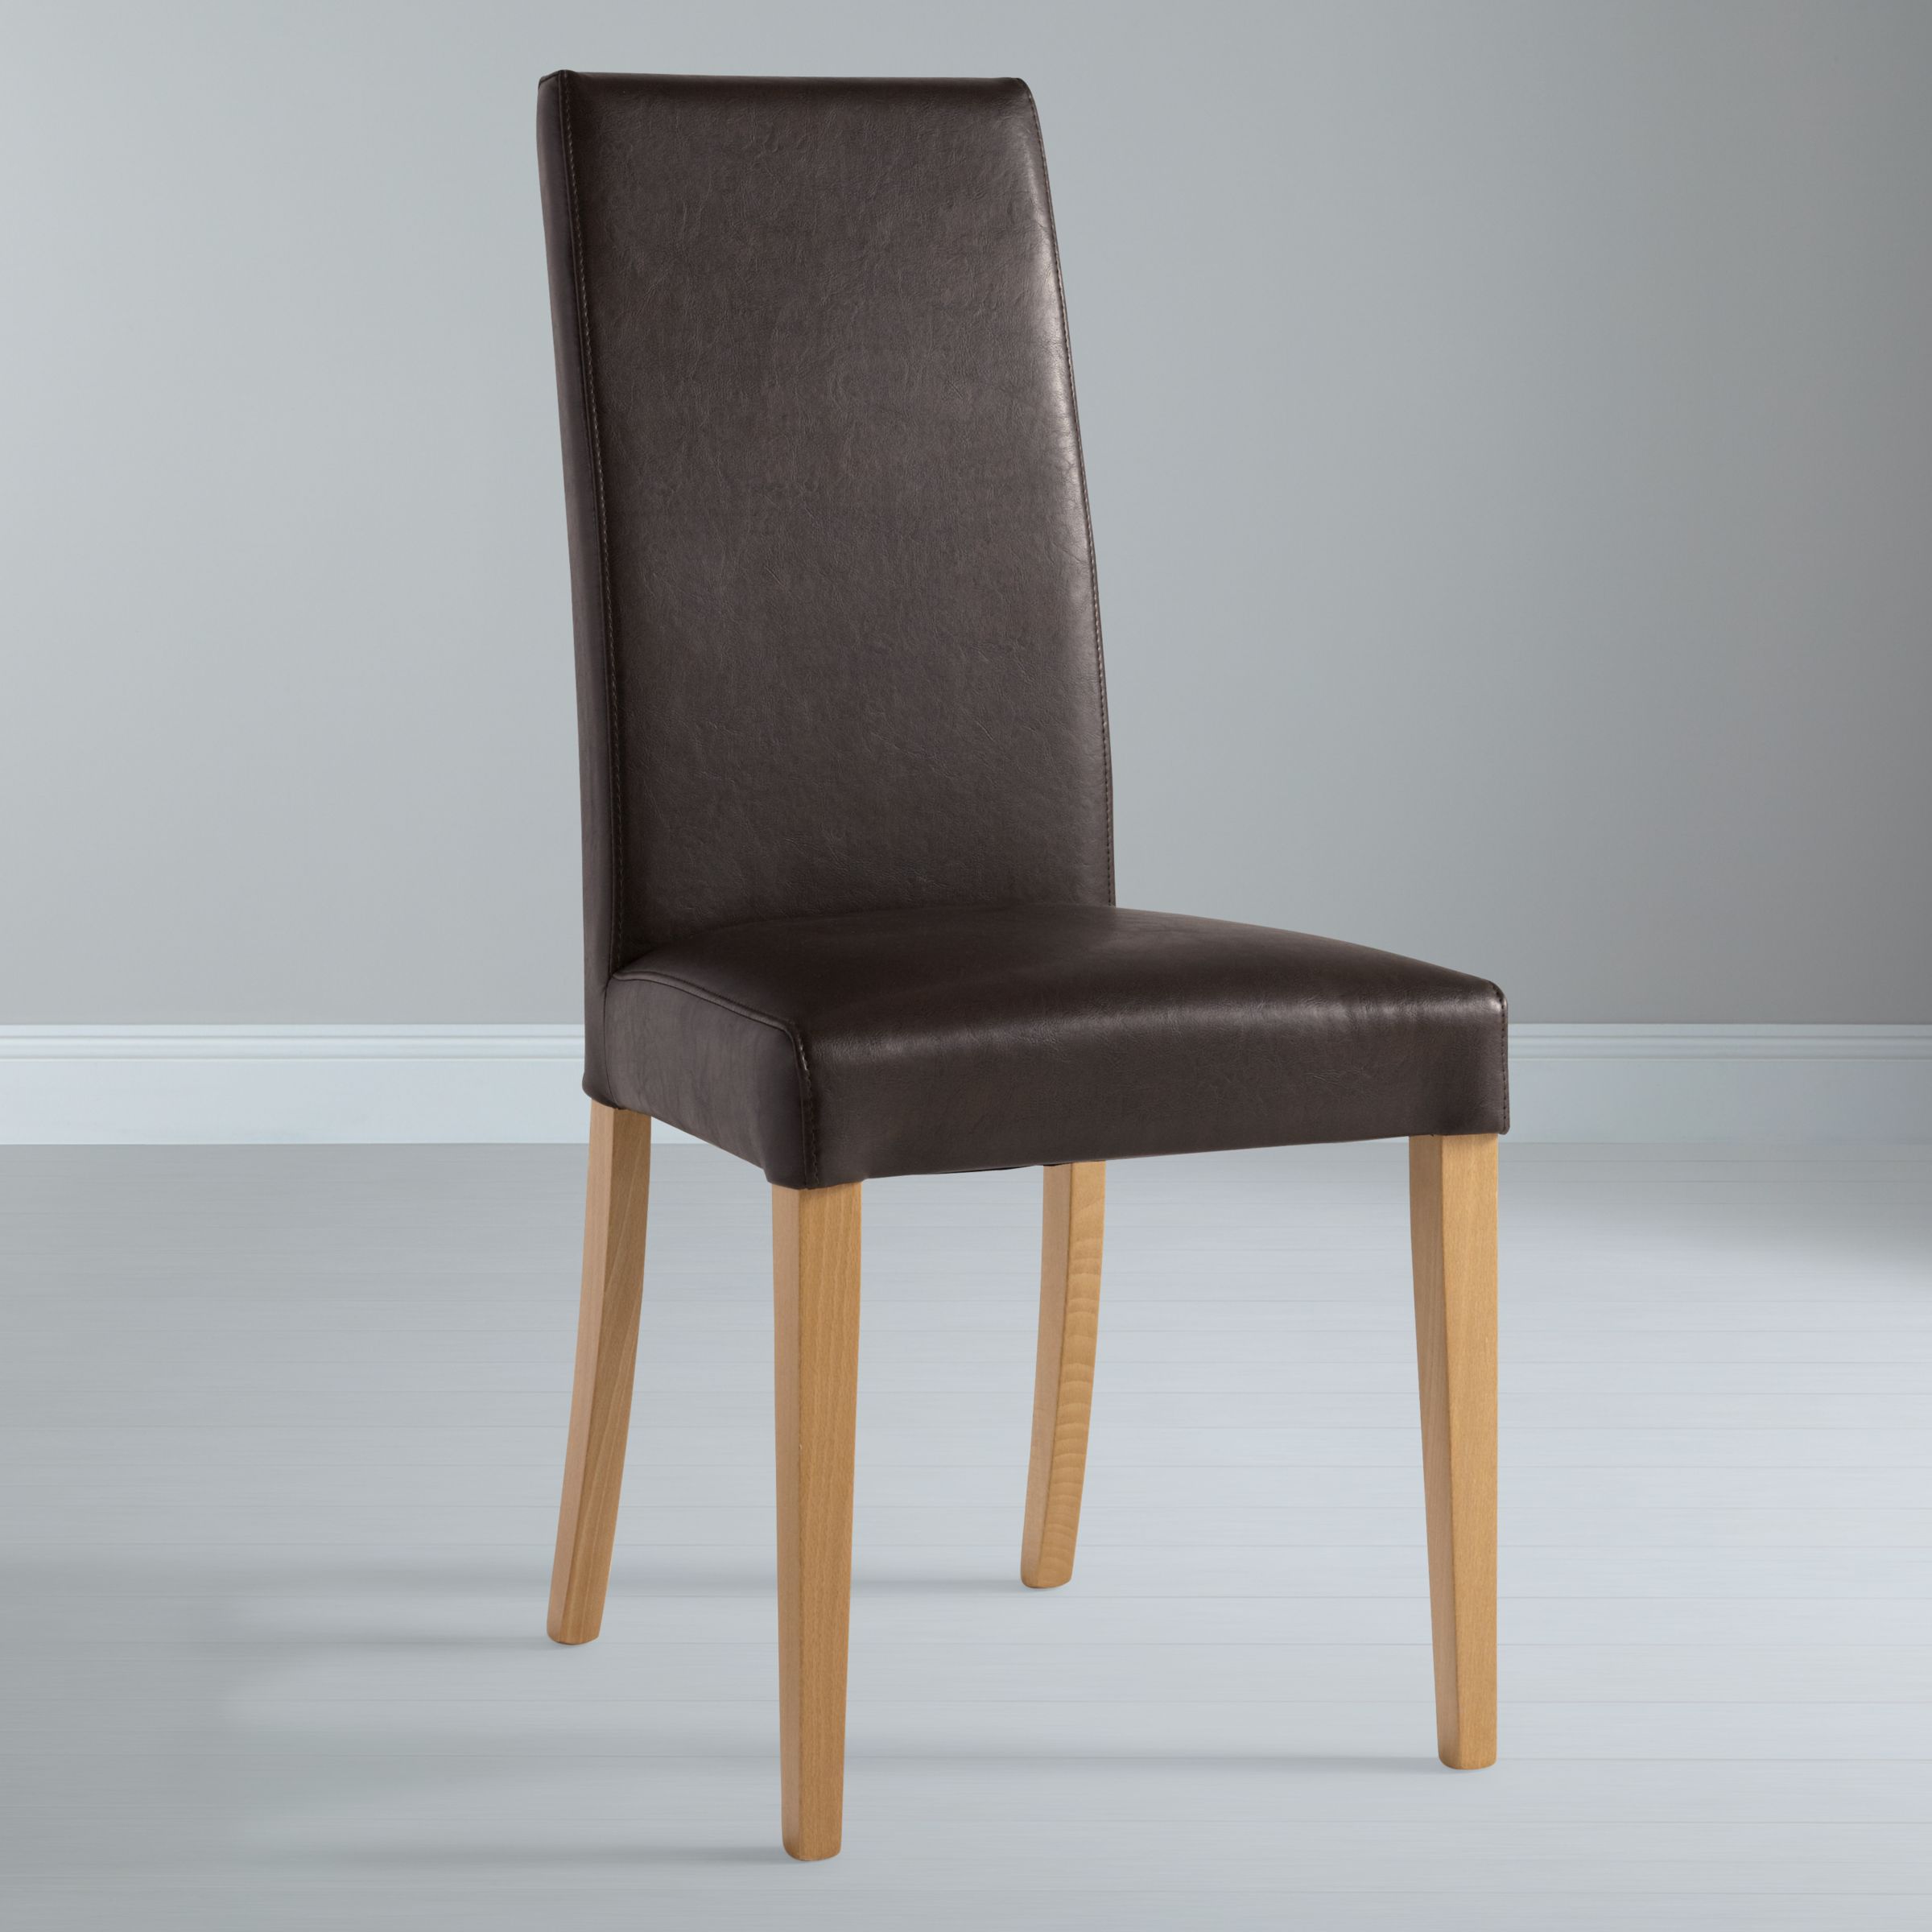 John Lewis Lydia Leatherette Dining Chair, Oak Stained